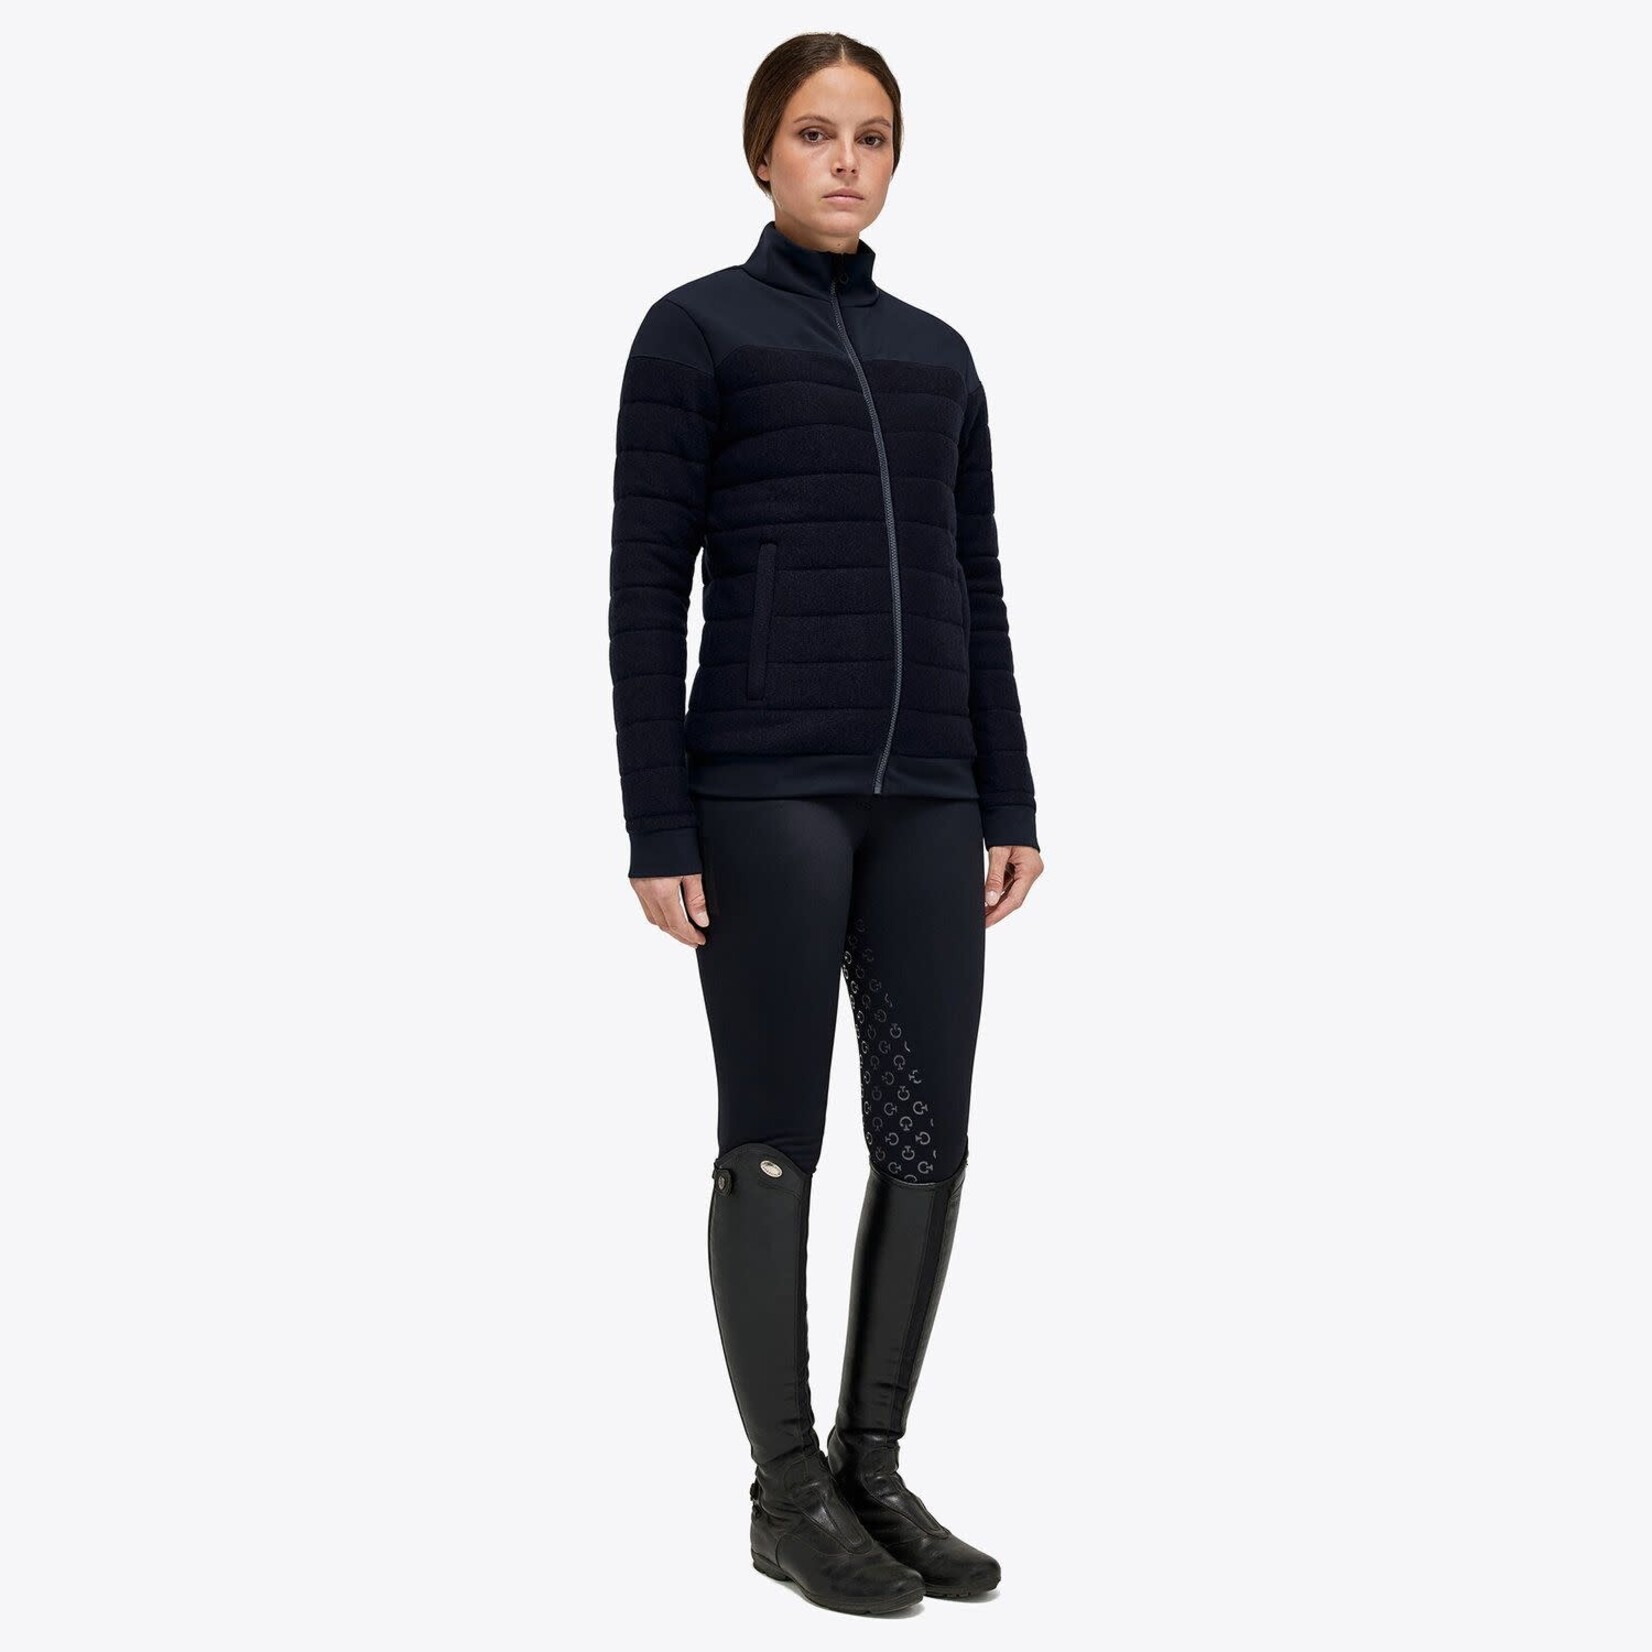 Cavalleria Toscana MAD120 Cavalleria Toscana Wool and Jersey Quilted Jacket